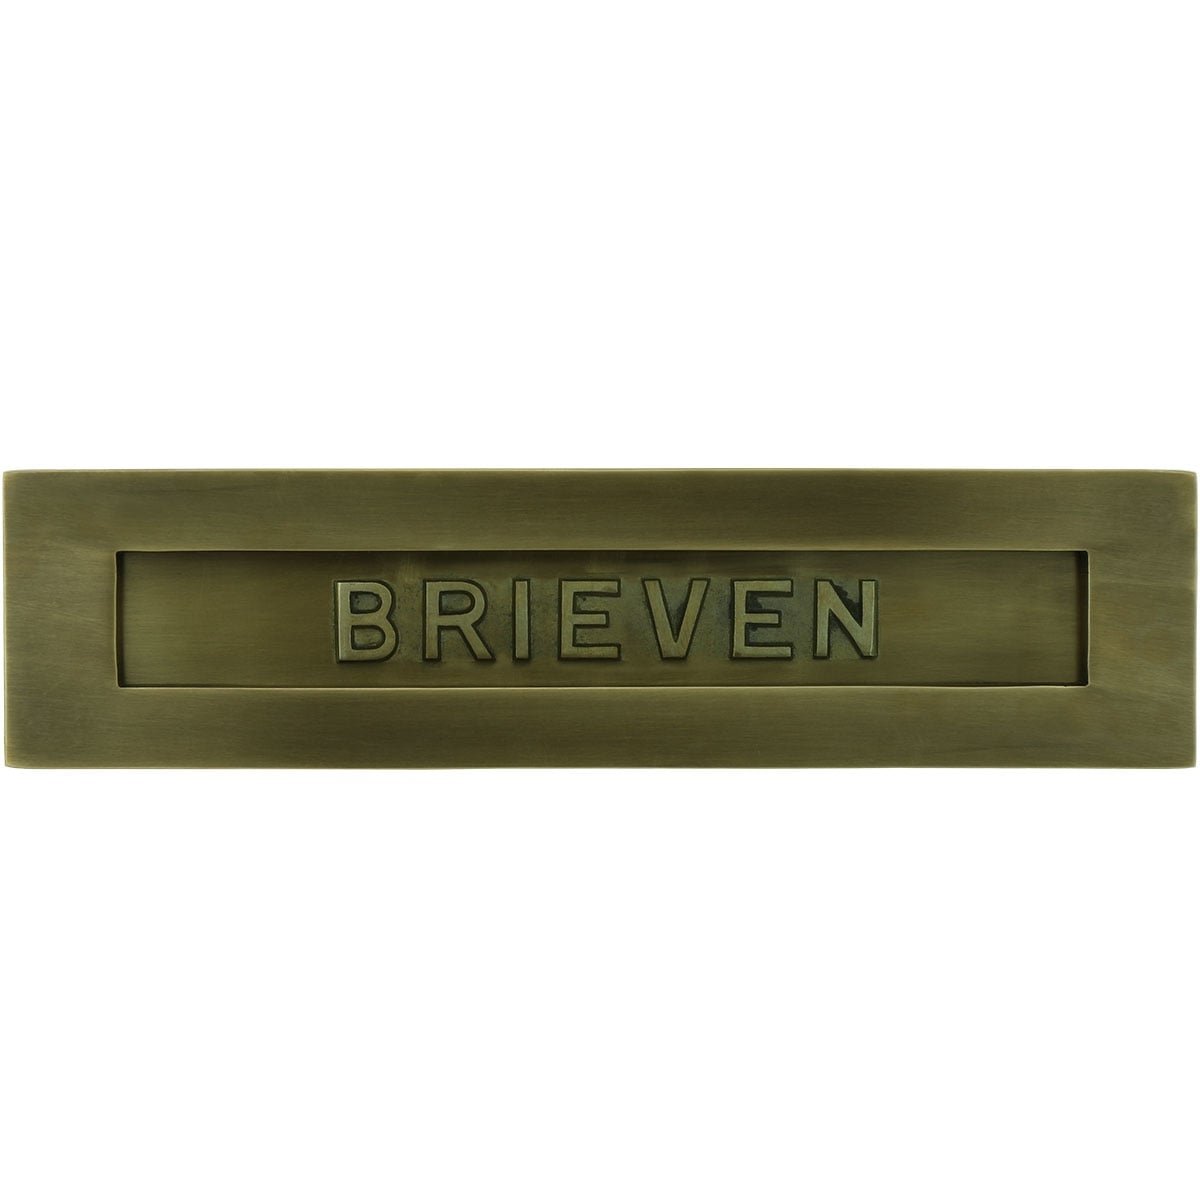 Mailboxes Classic Rural Letterbox brieven bronze Wickford - 80 mm